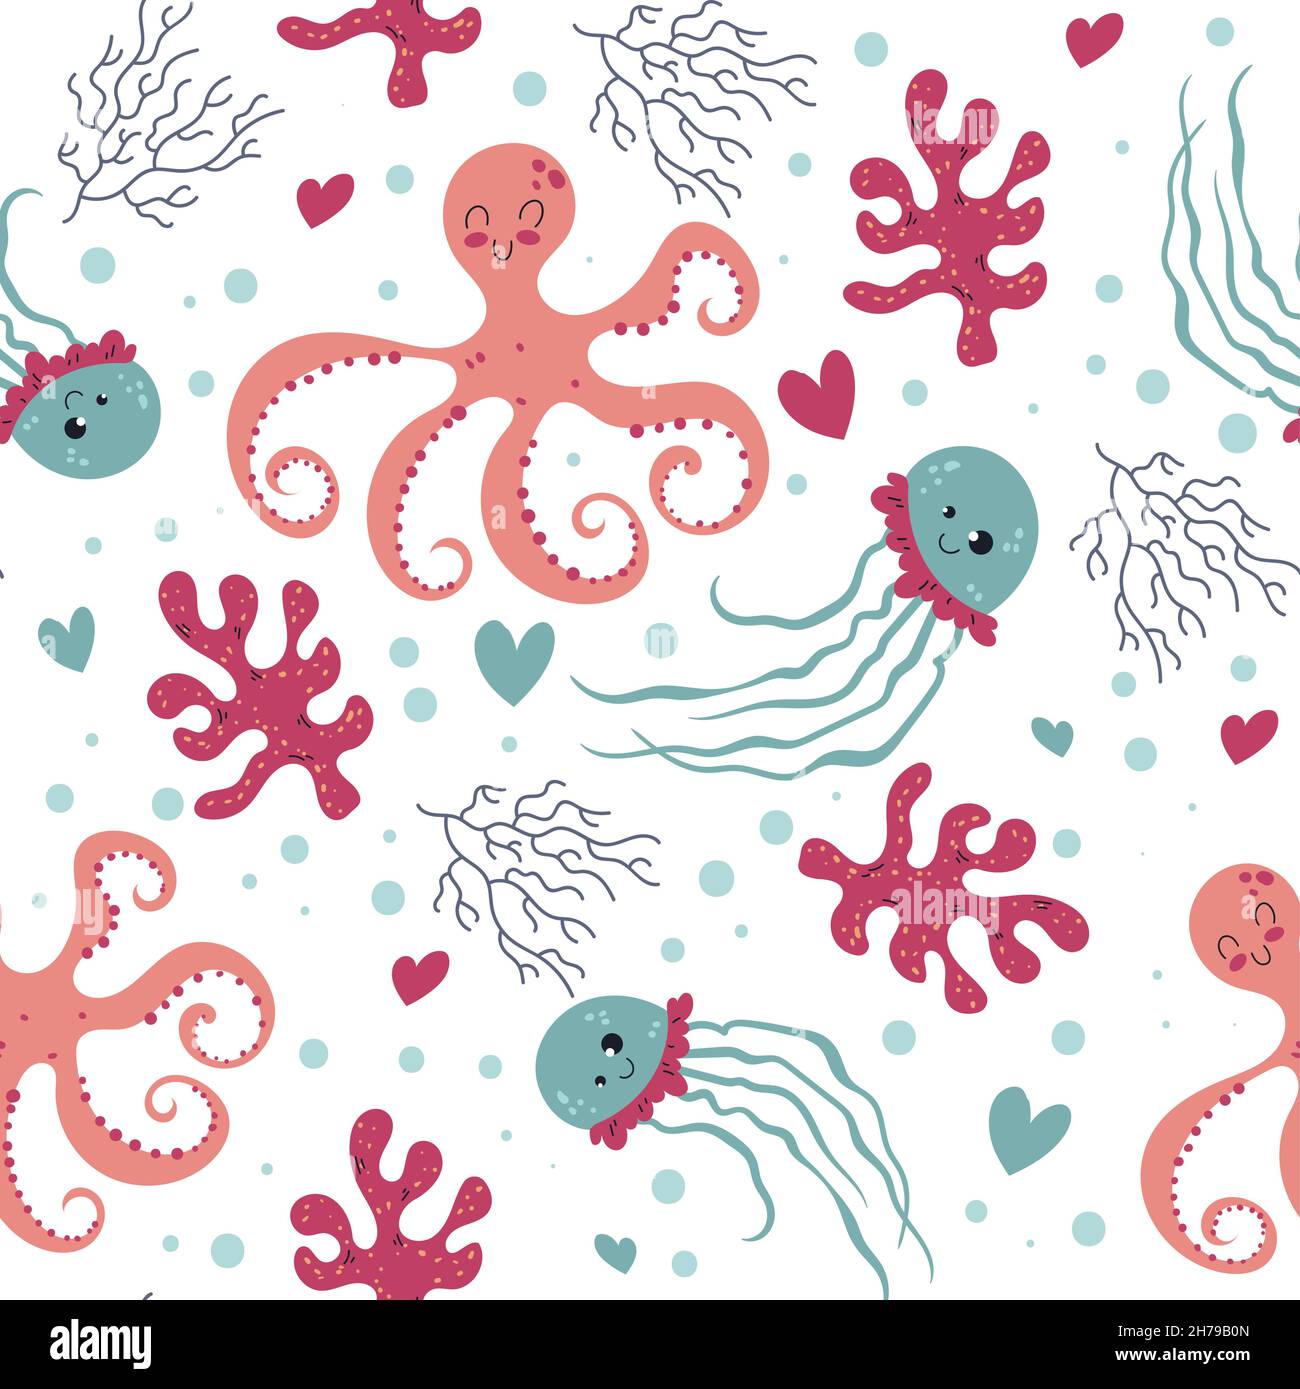 Seamless pattern sea world. Marine animals, corals and algae, kids octopus and jellyfish, ocean underwater creatures, cute characters. Decor textile Stock Vector